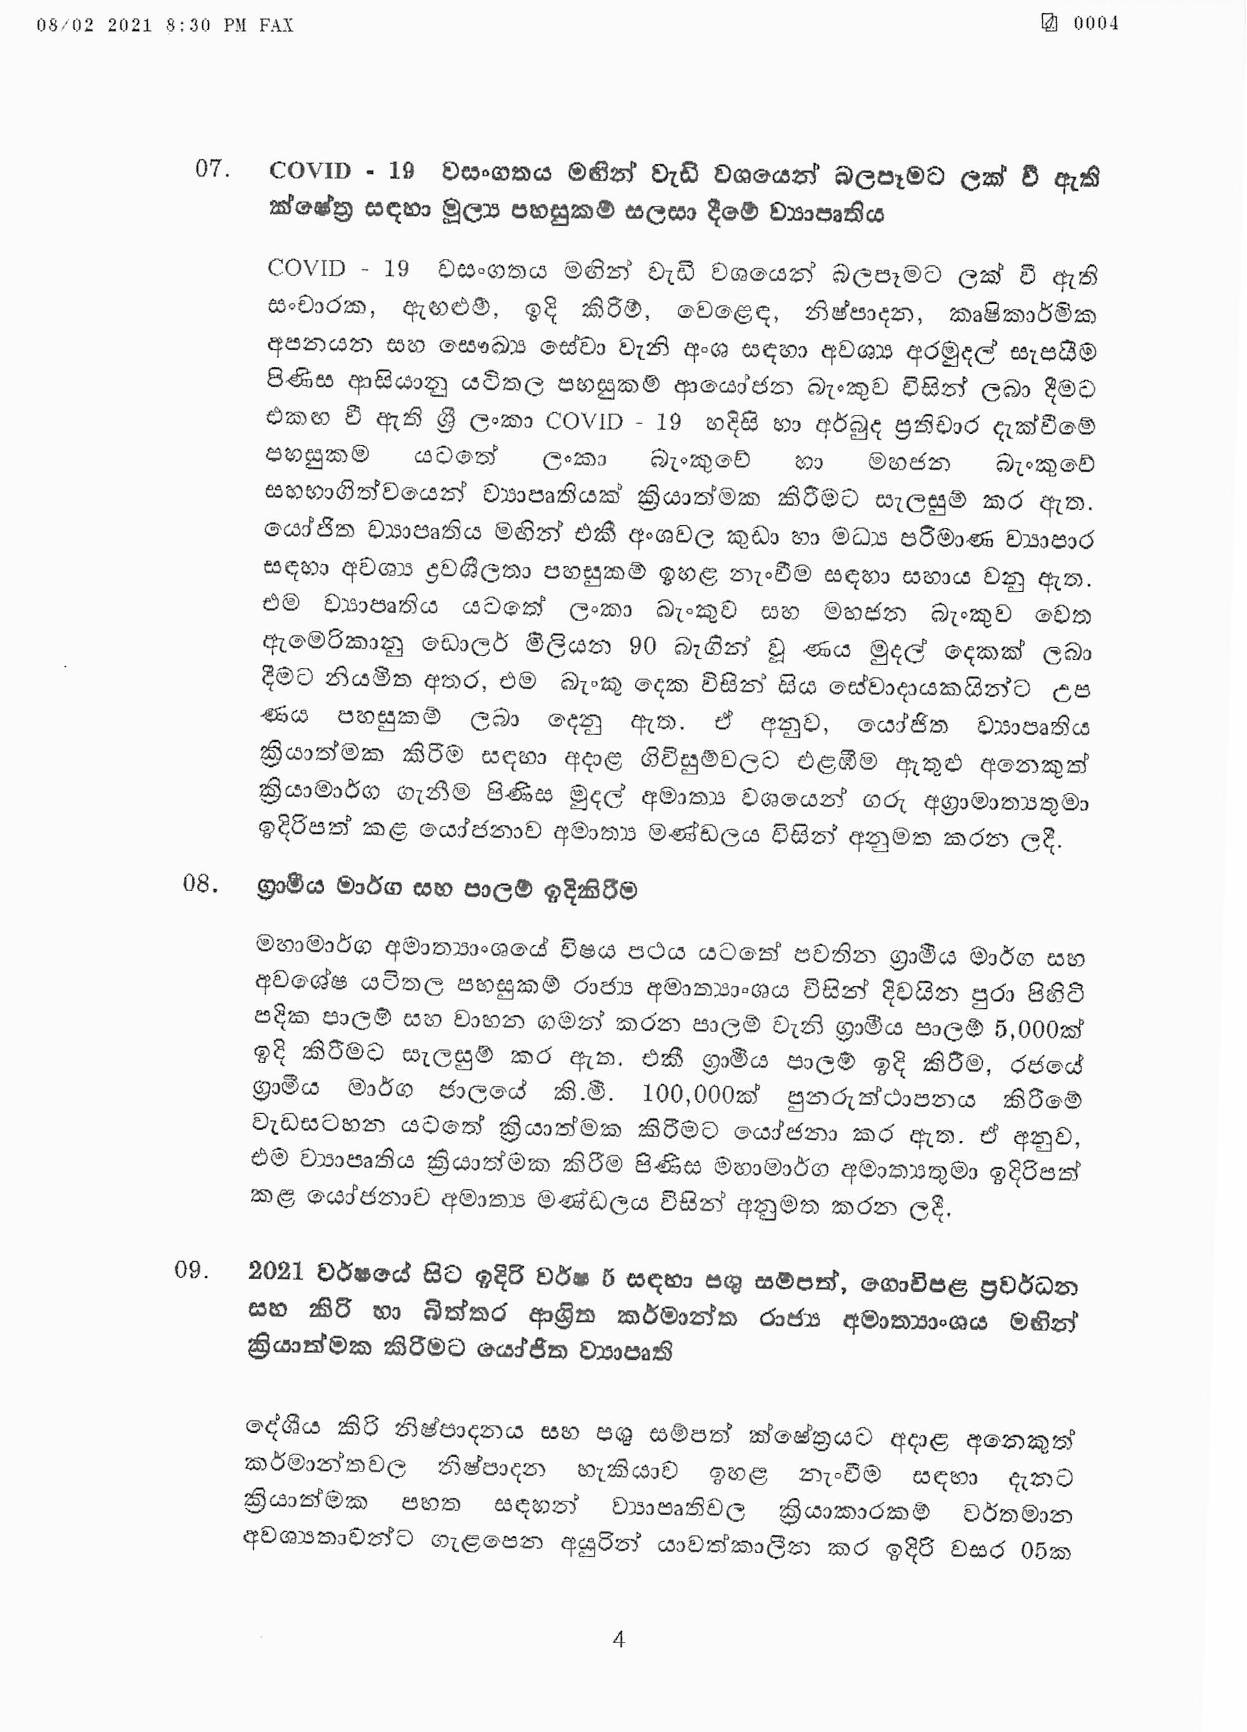 Cabinet Decision on 08.02.2021 page 004